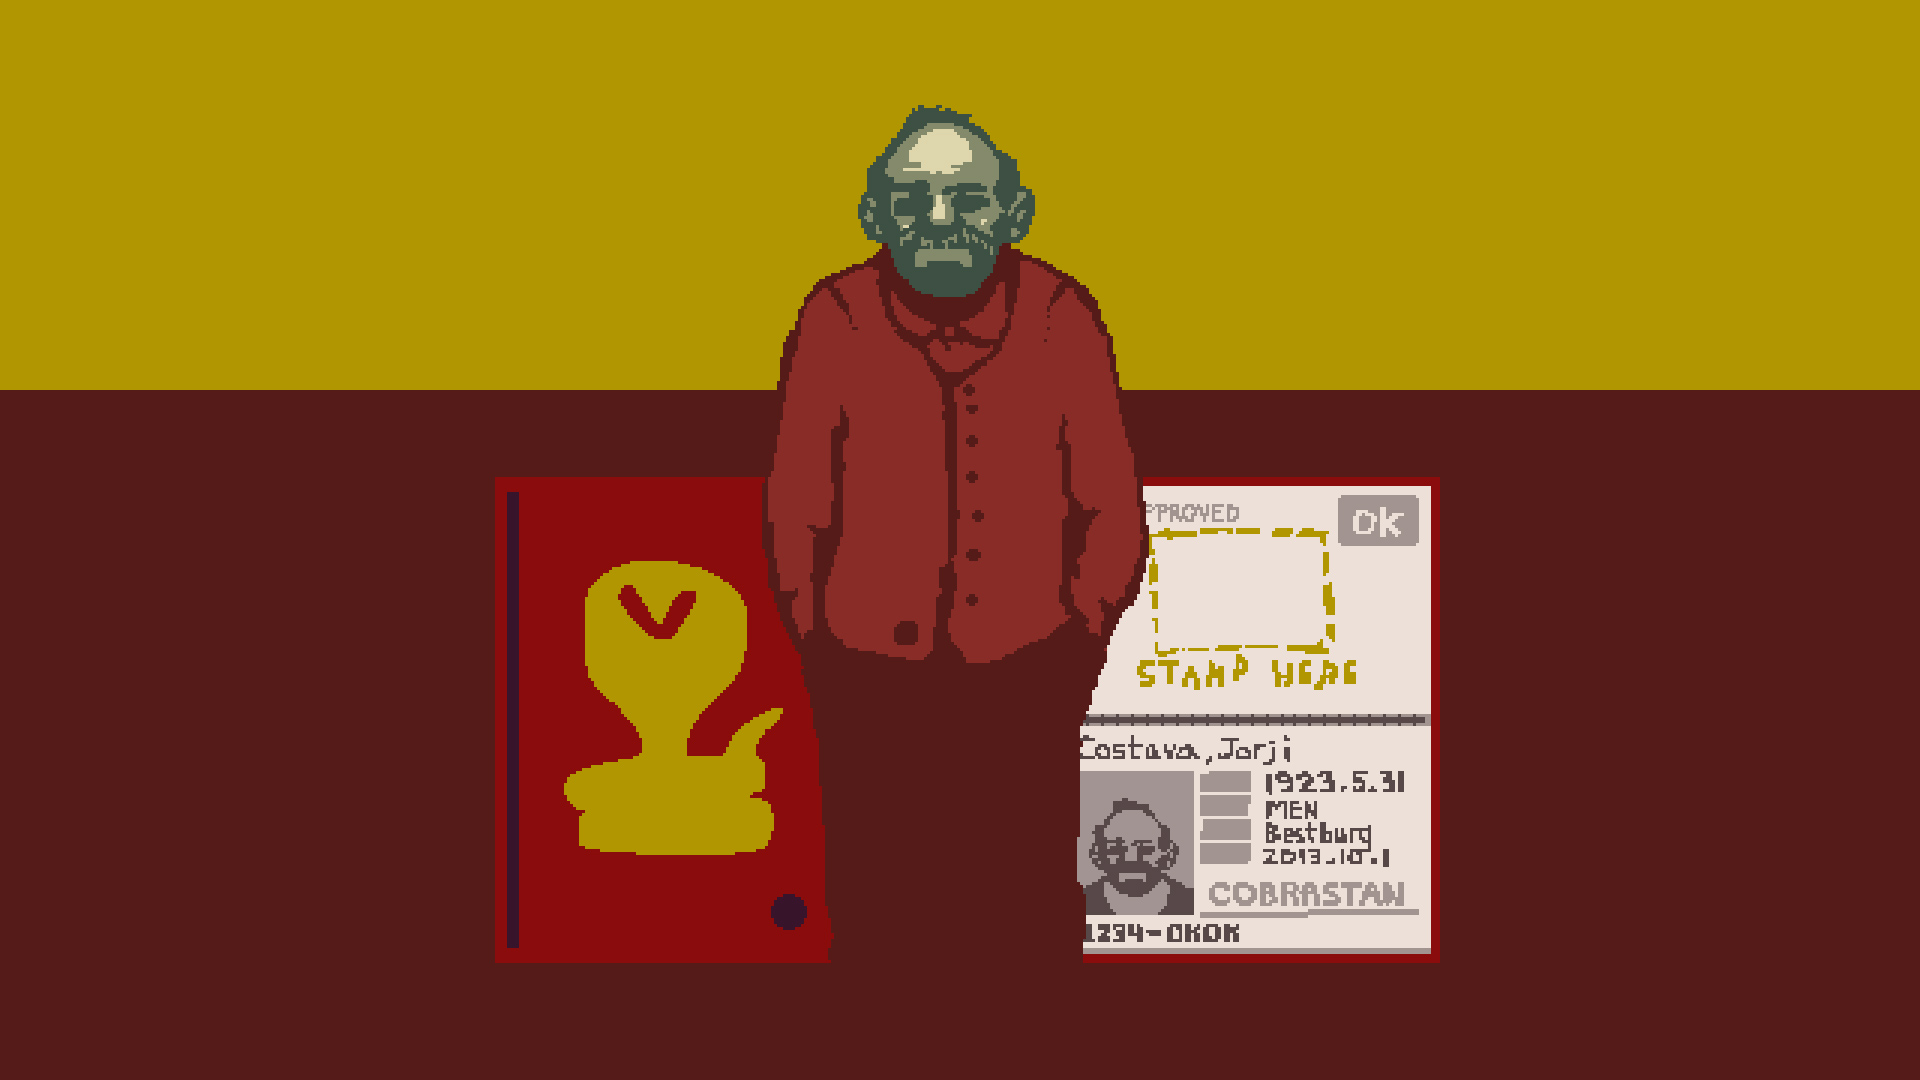 Photo, Papers Please Wiki